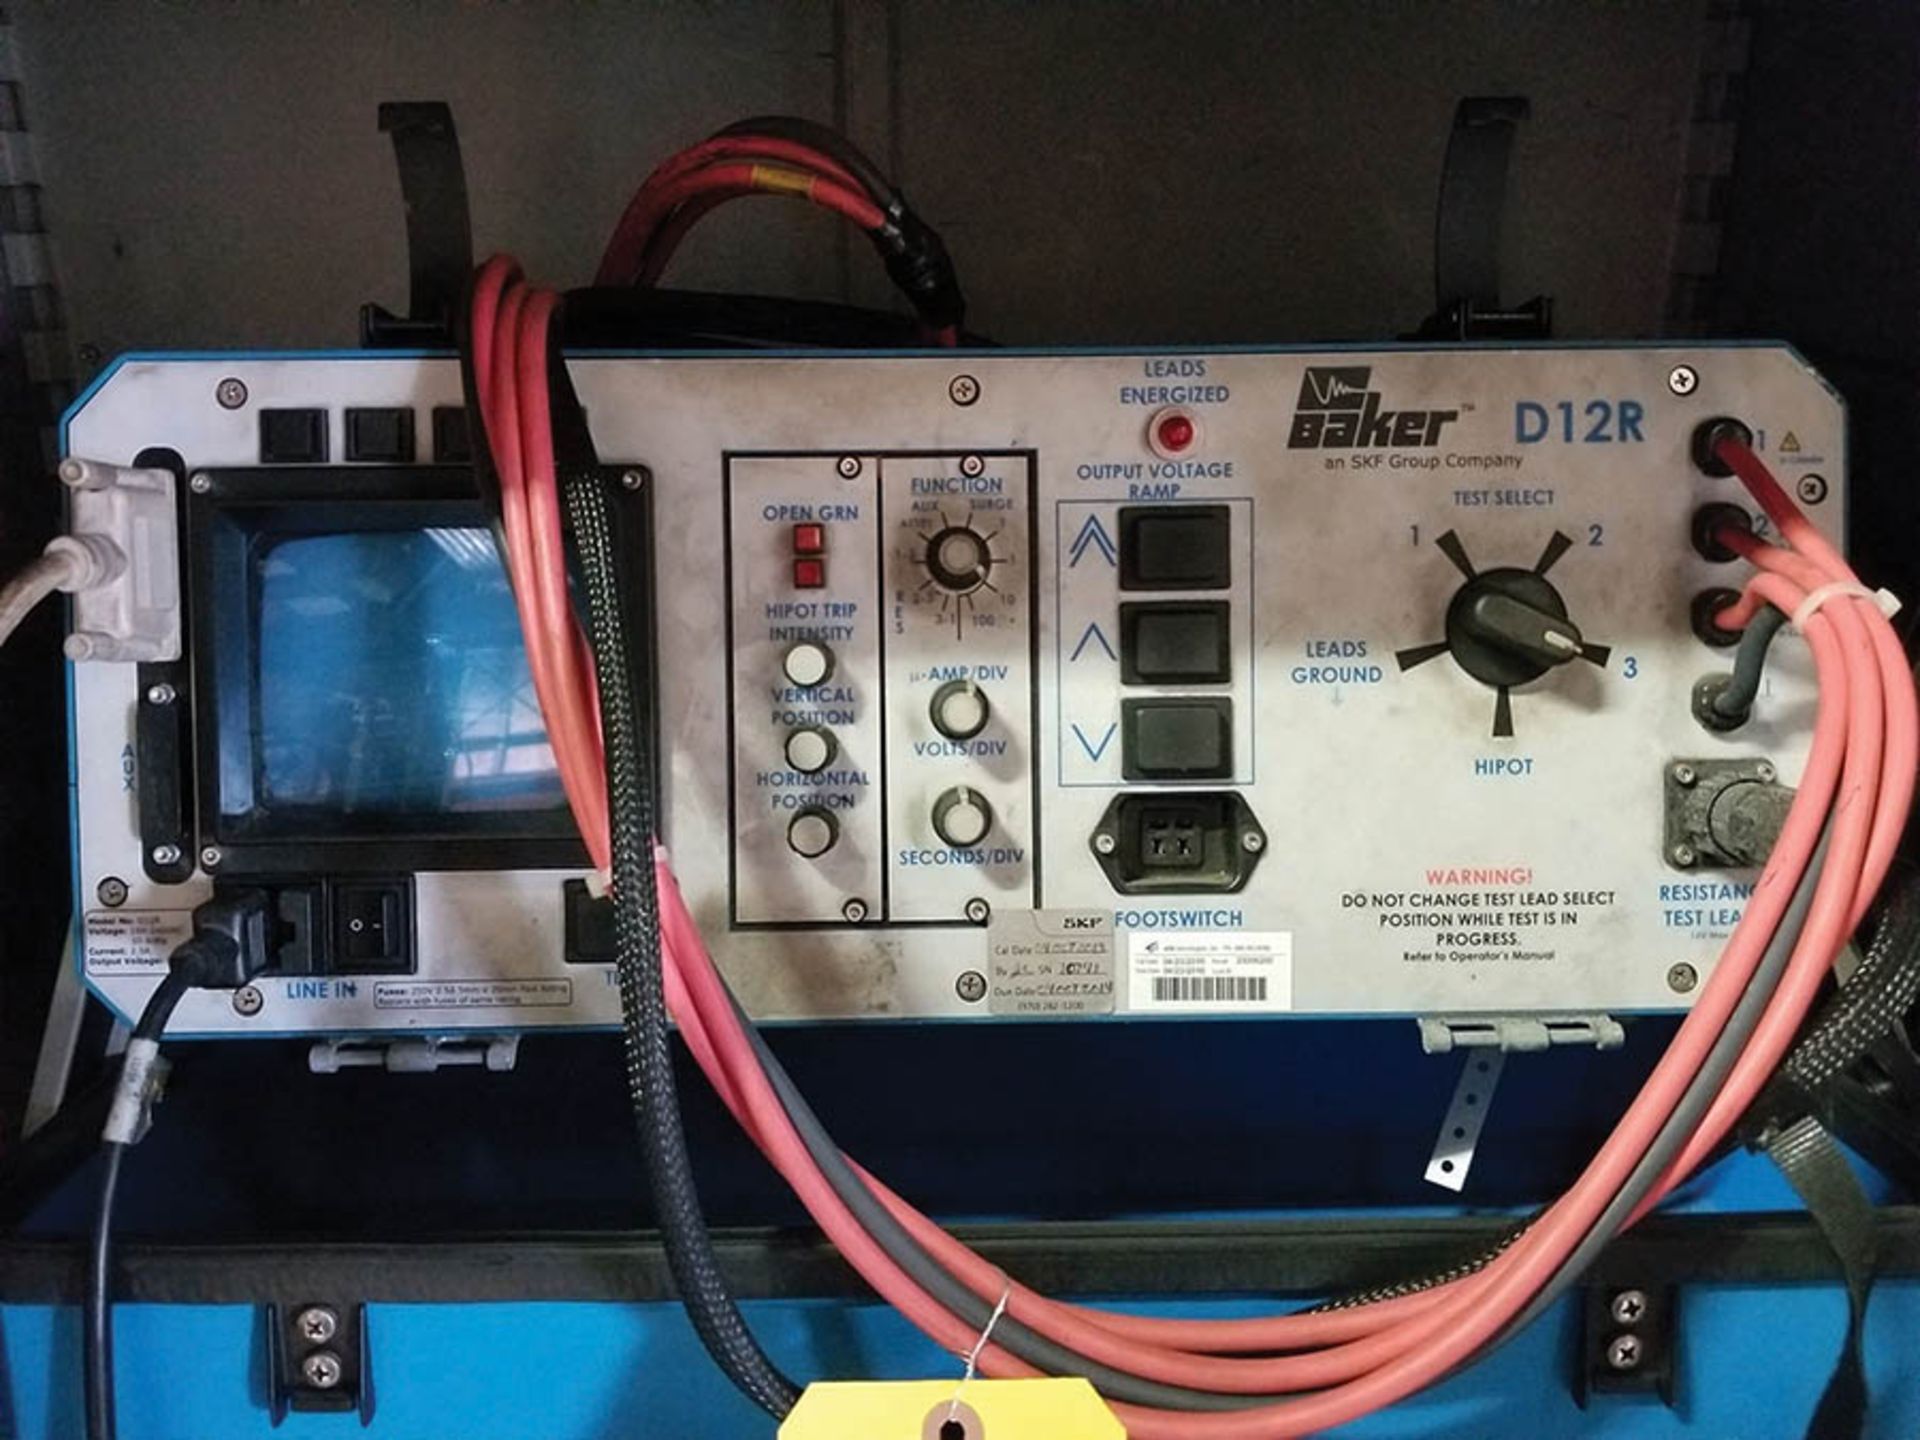 SKF BAKER D12R ELECTRICAL RESISTANCE TESTER, FOOTSWITCH, AND READ OUT SCREEN IN CABINET WITH TEST - Image 2 of 6